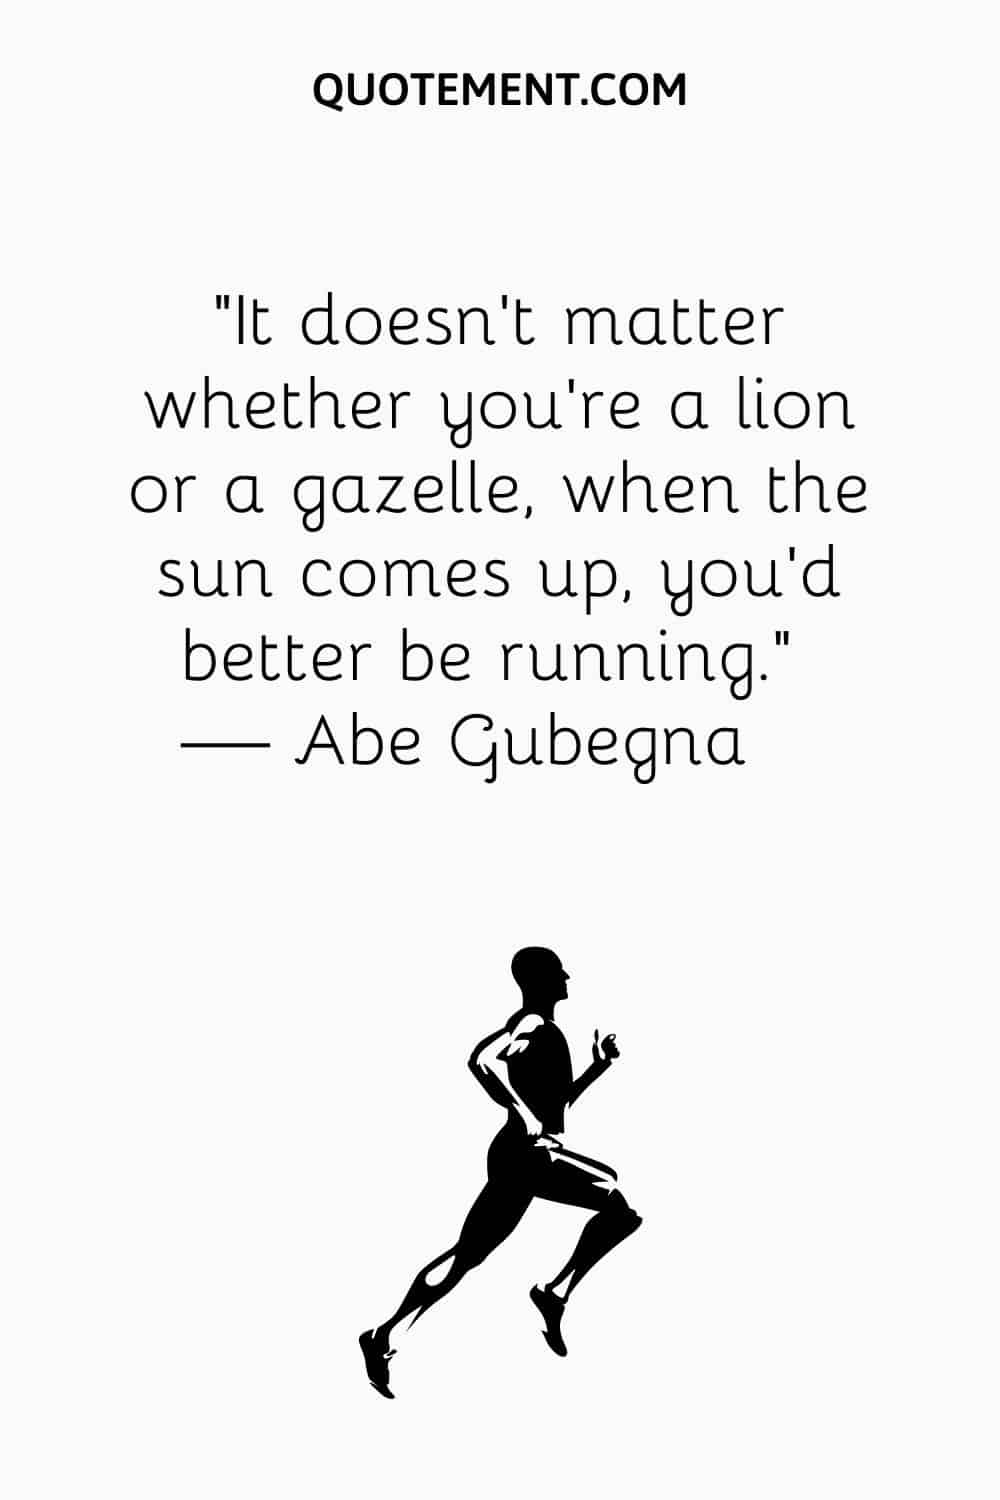 It doesn’t matter whether you’re a lion or a gazelle, when the sun comes up, you’d better be running